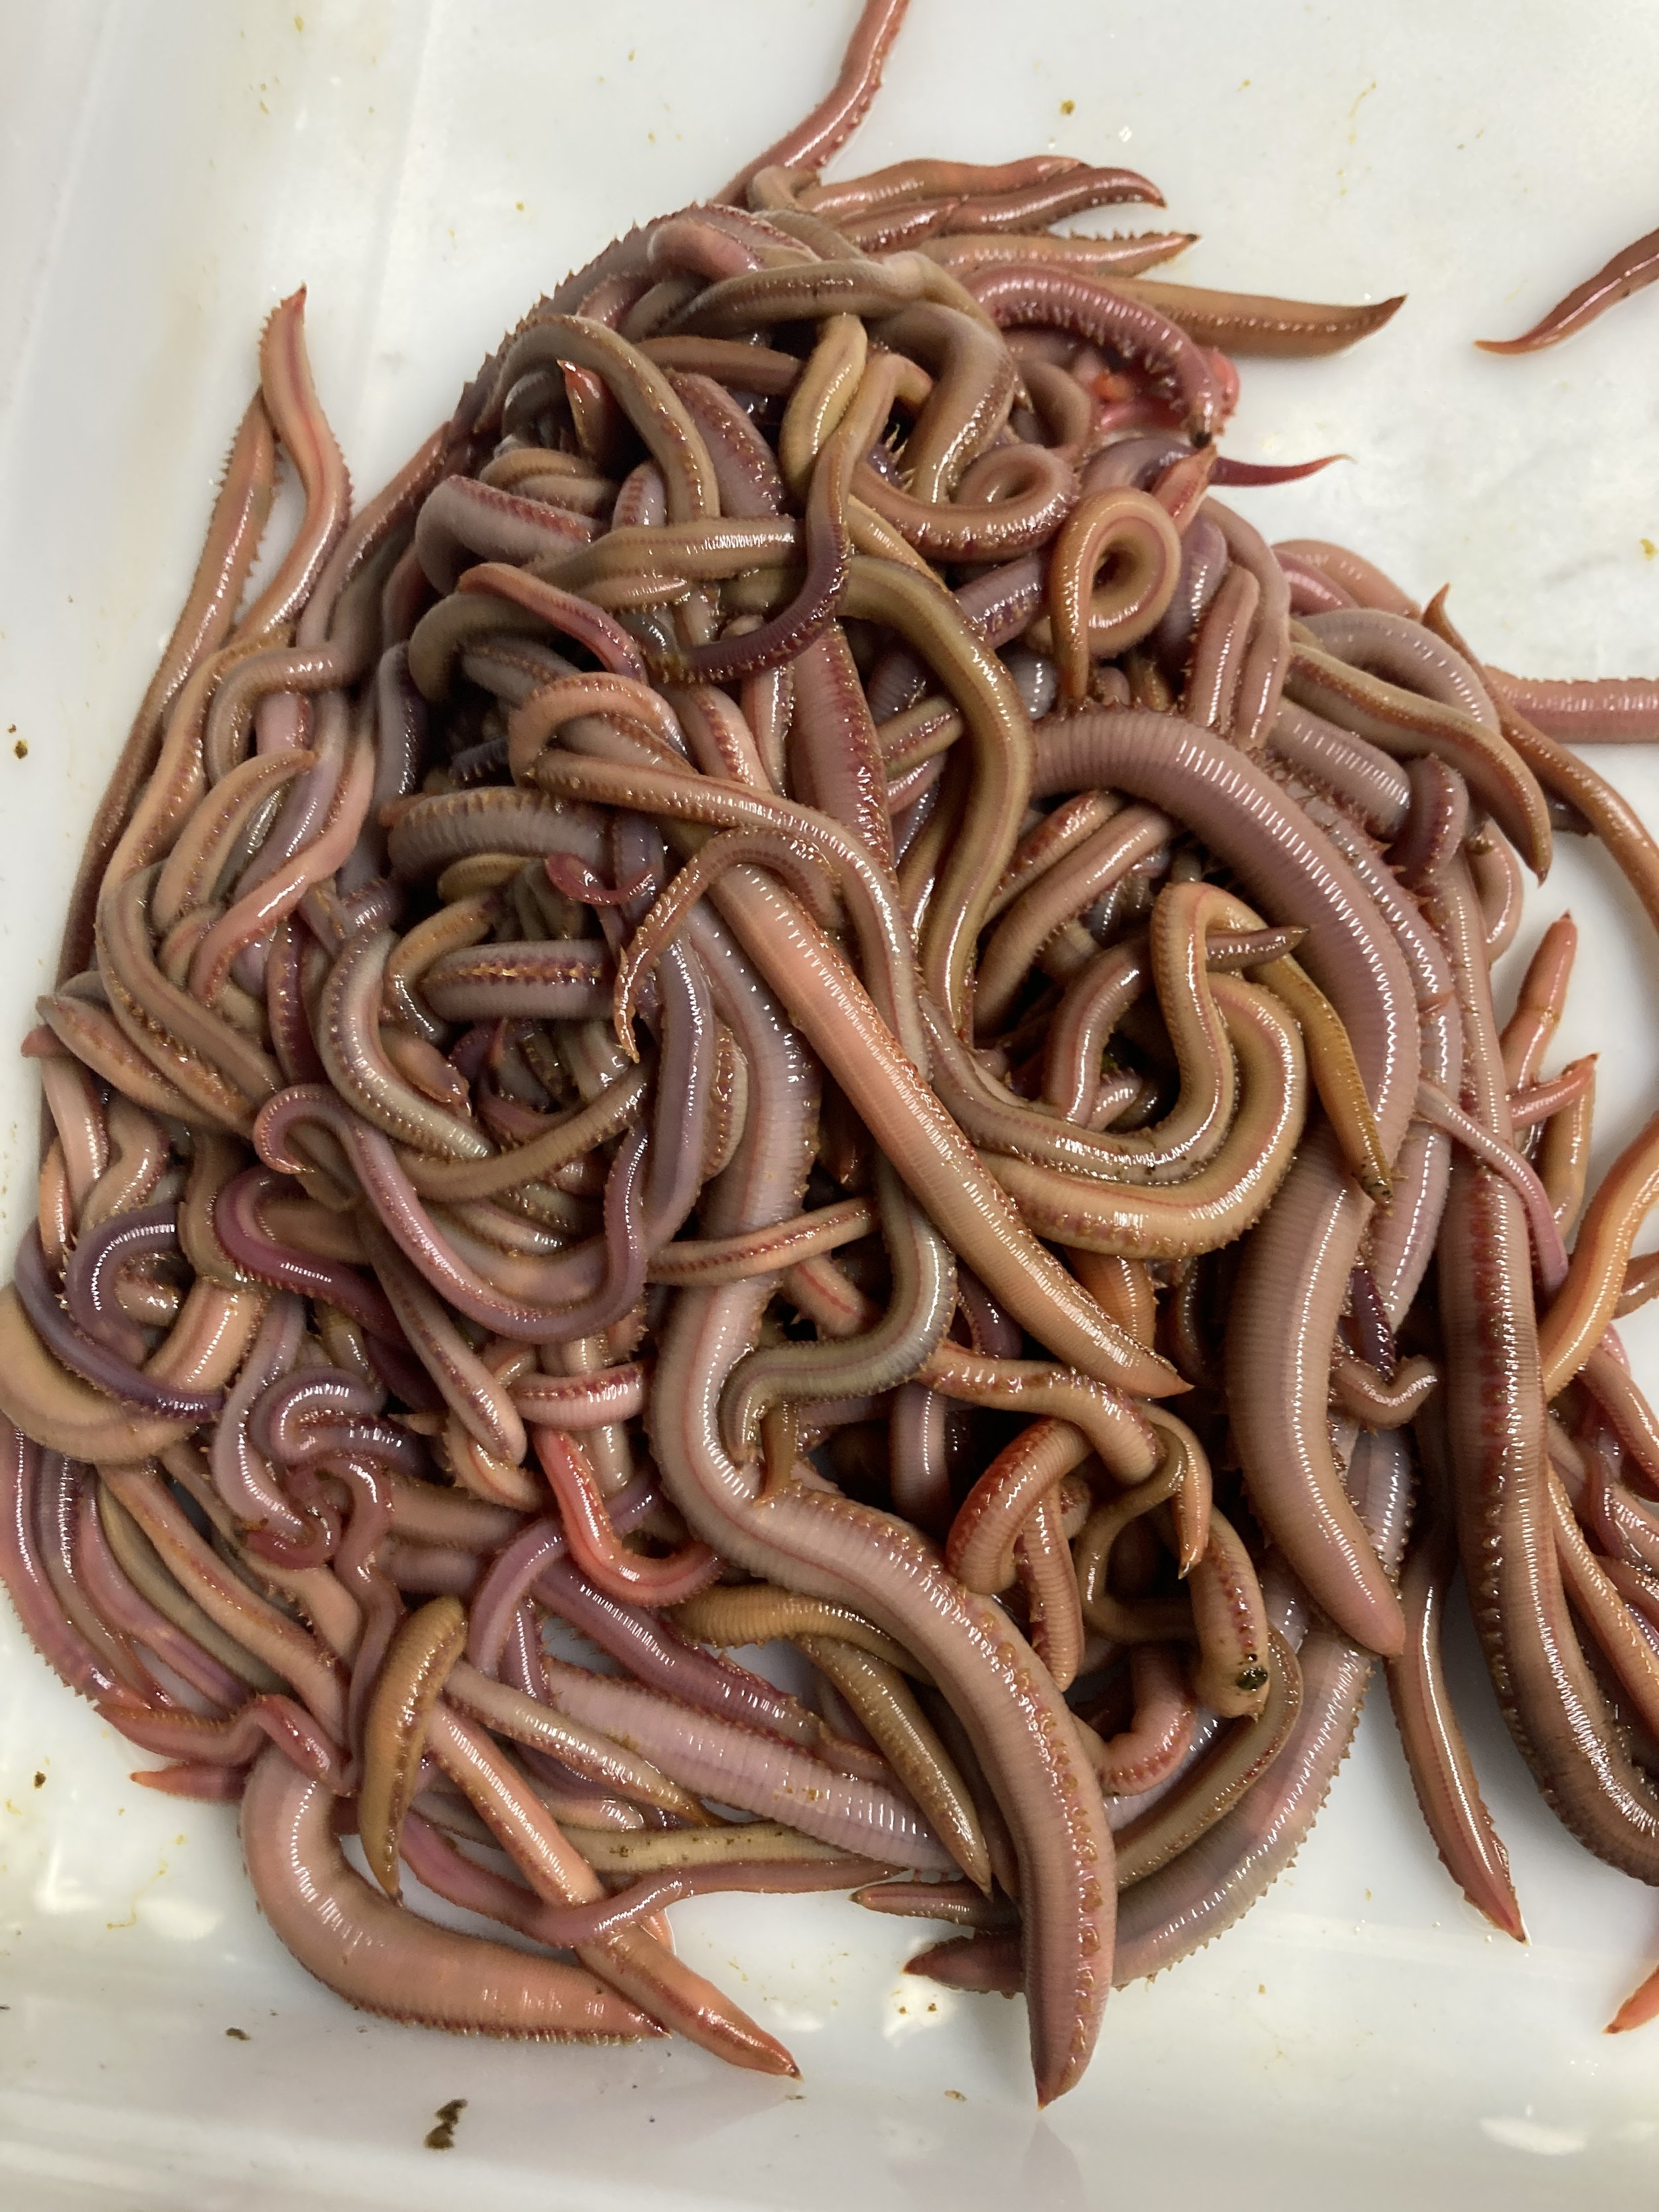 Big Bloodworms for your Striper fishing. Get your @ bloodwormdepot.com